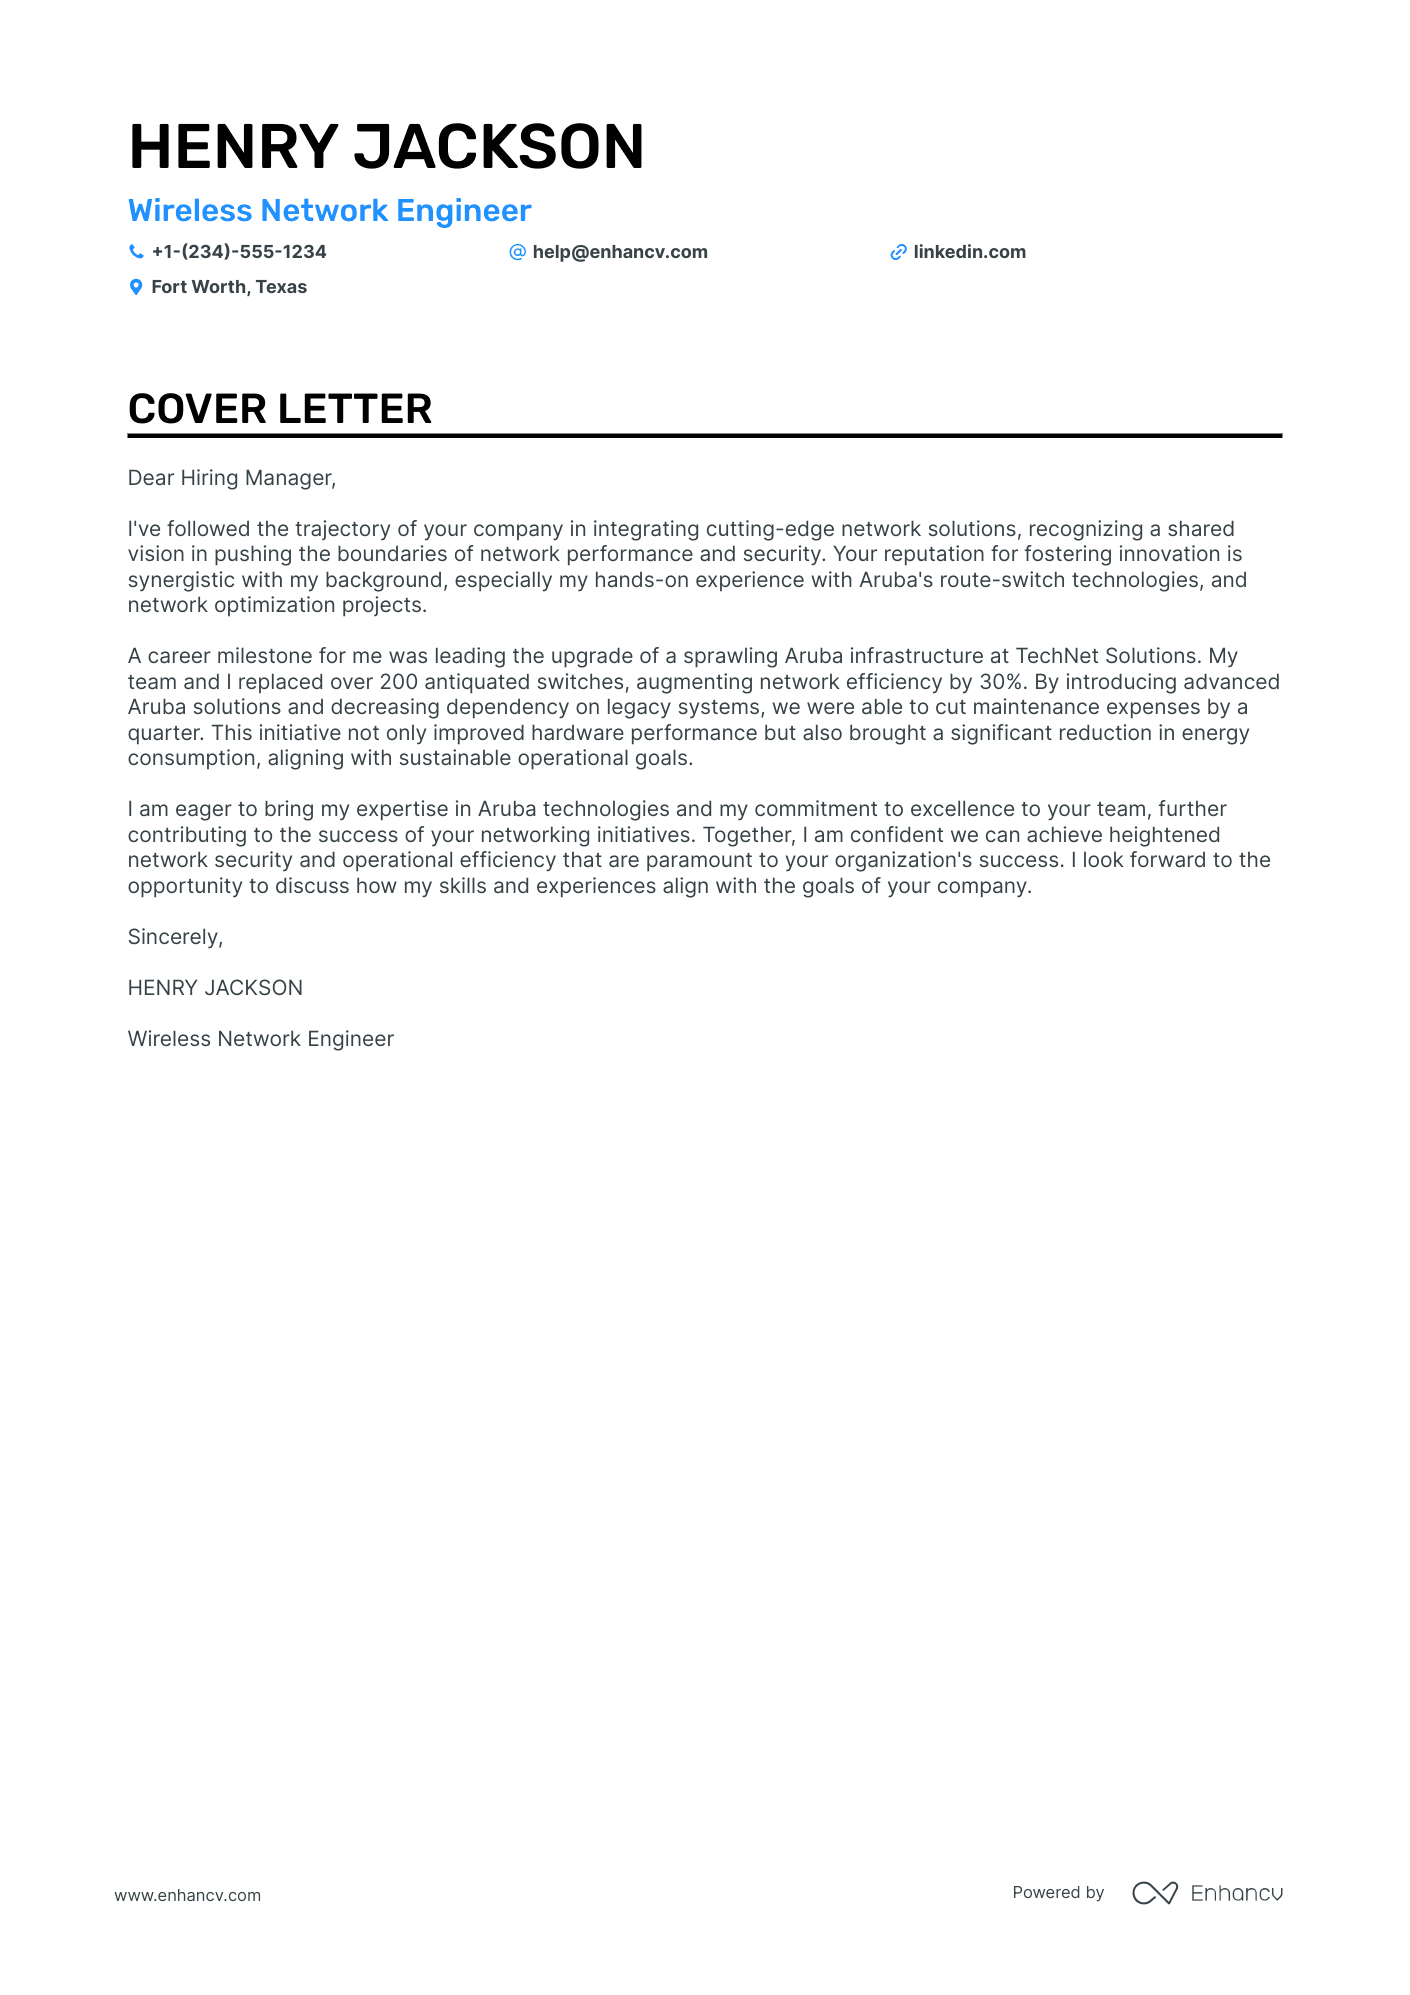 Wireless Network Engineer cover letter